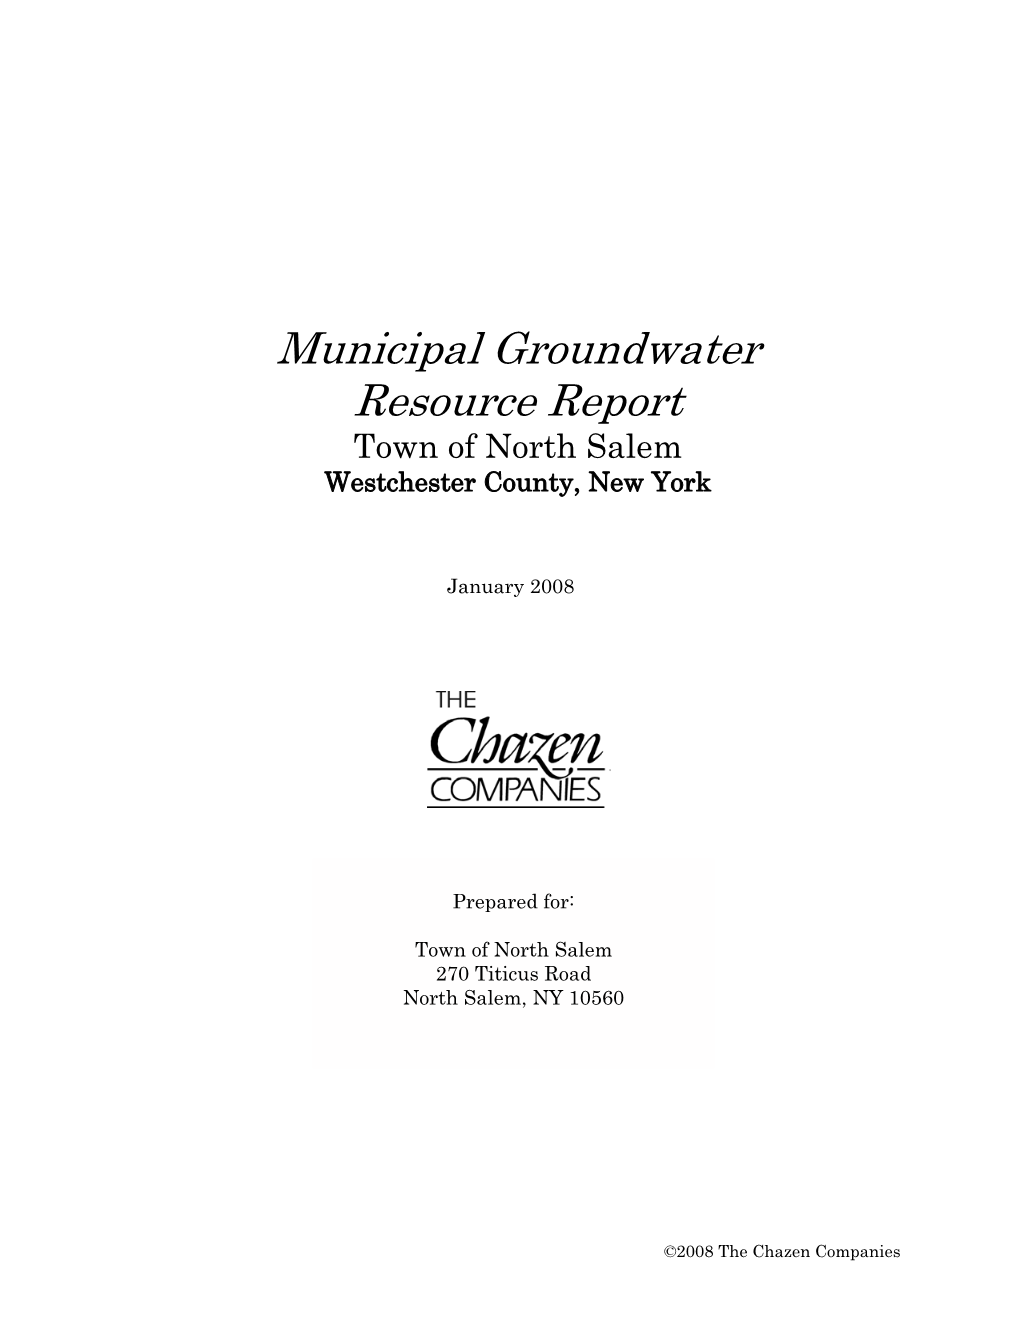 Municipal Groundwater Resource Report Town of North Salem Page I